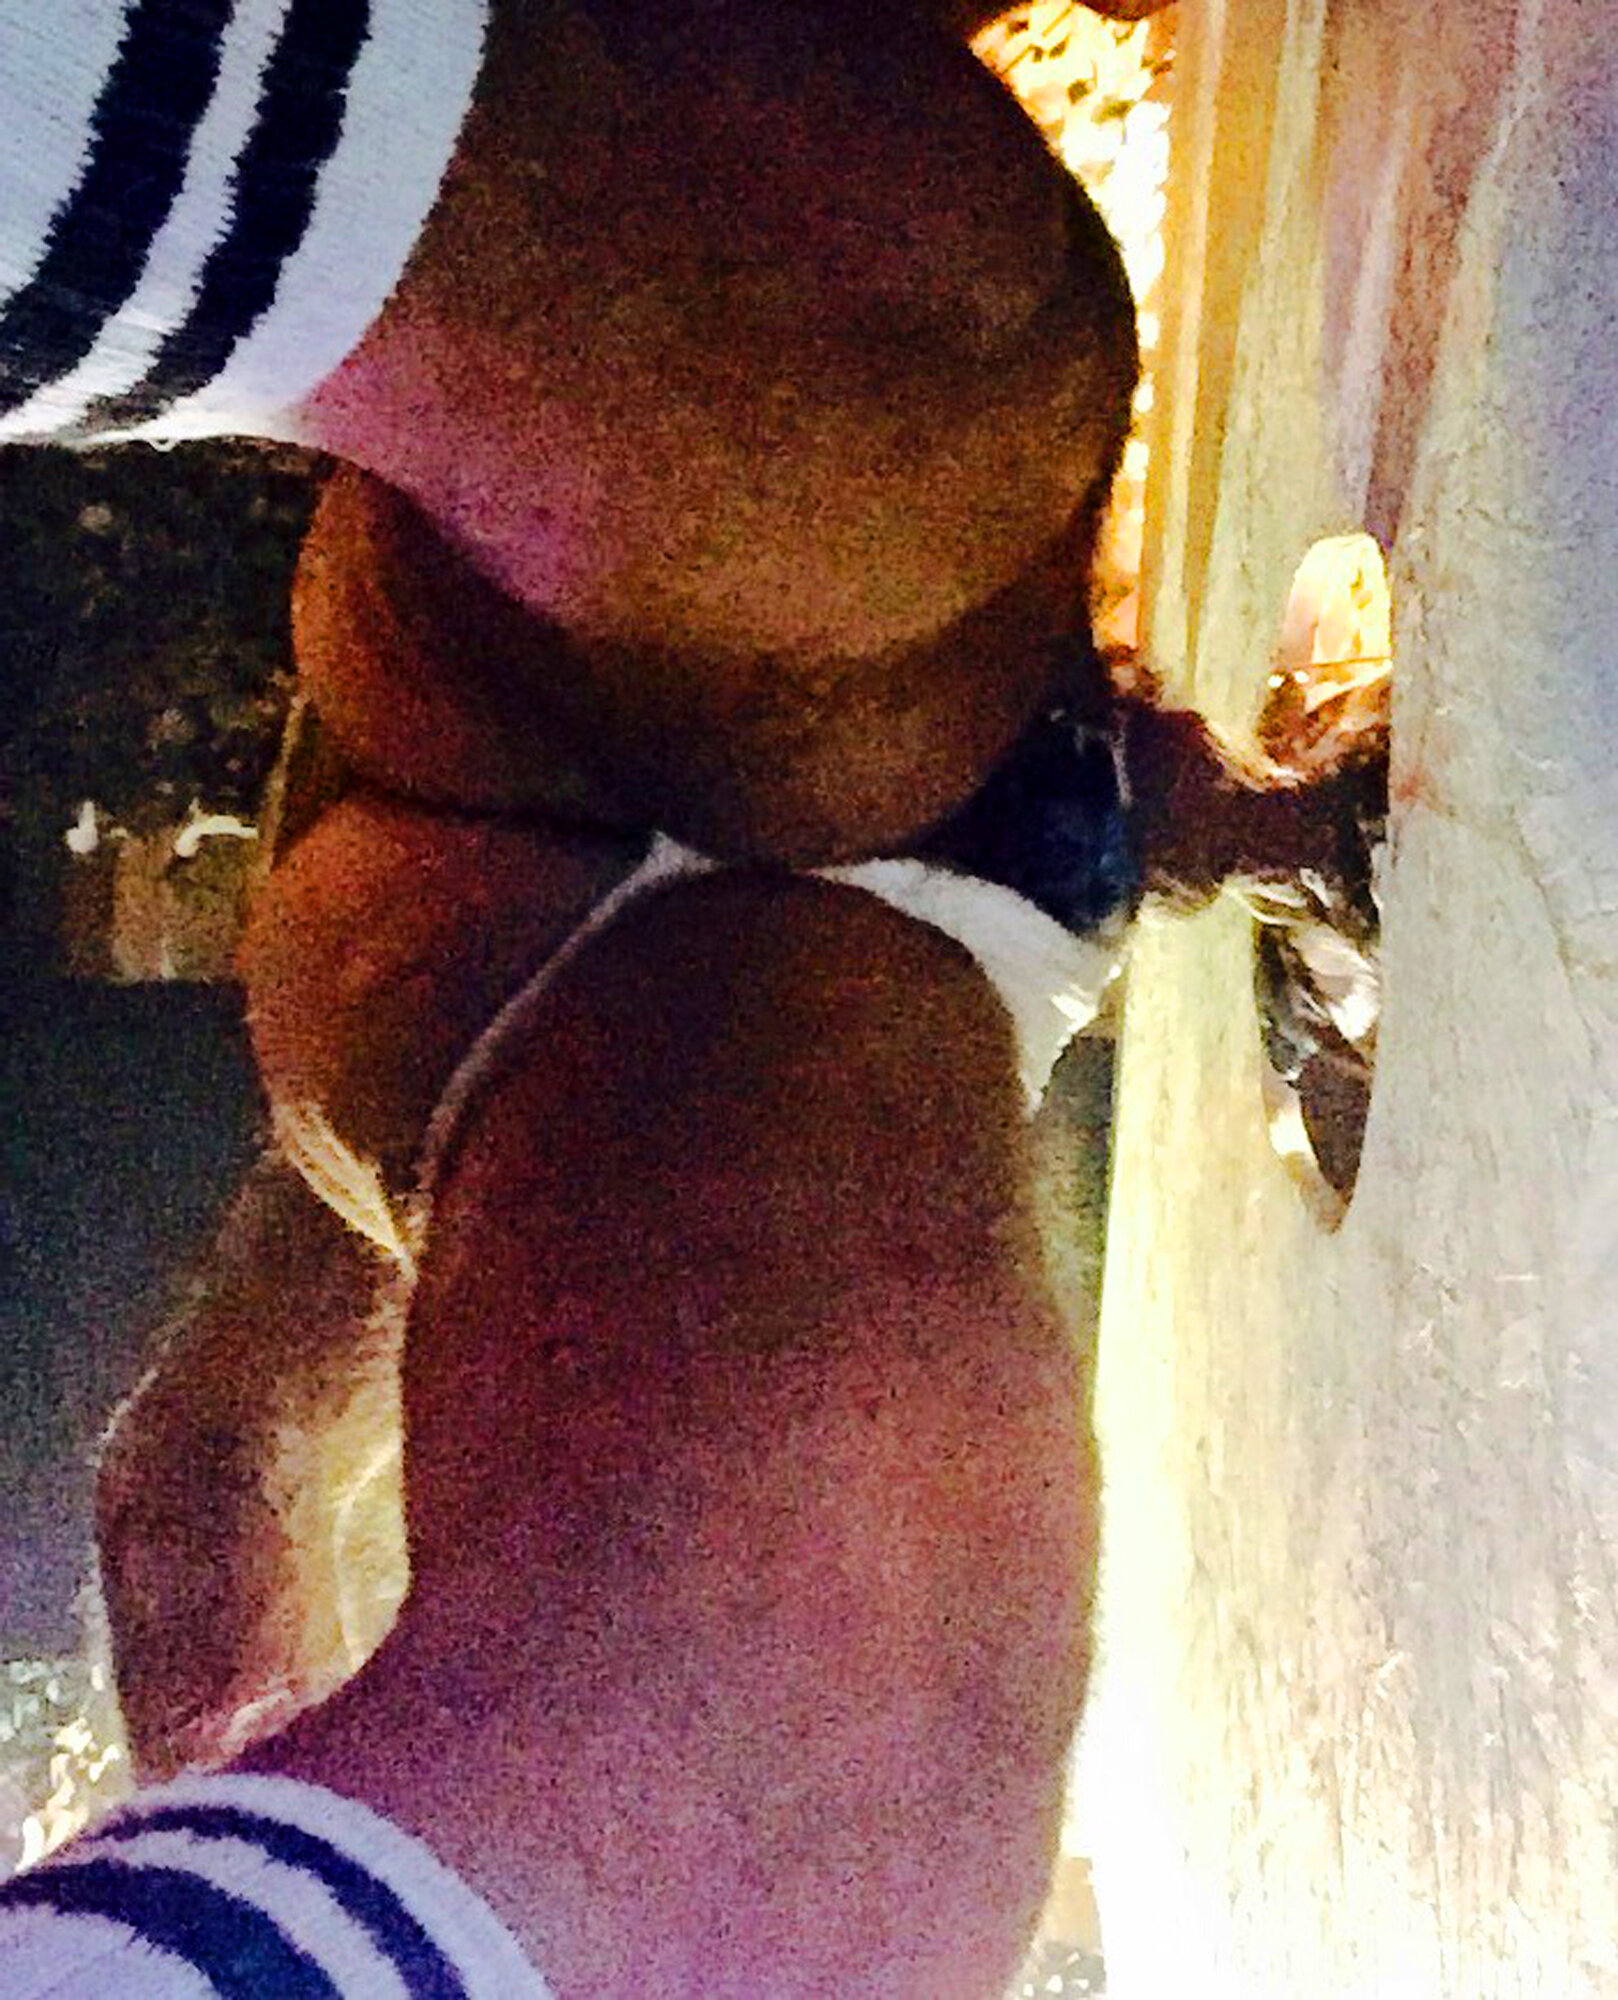 STINKYDONGER JOCKSTRAPPED FROM BELOW AT THE GLORYHOLE